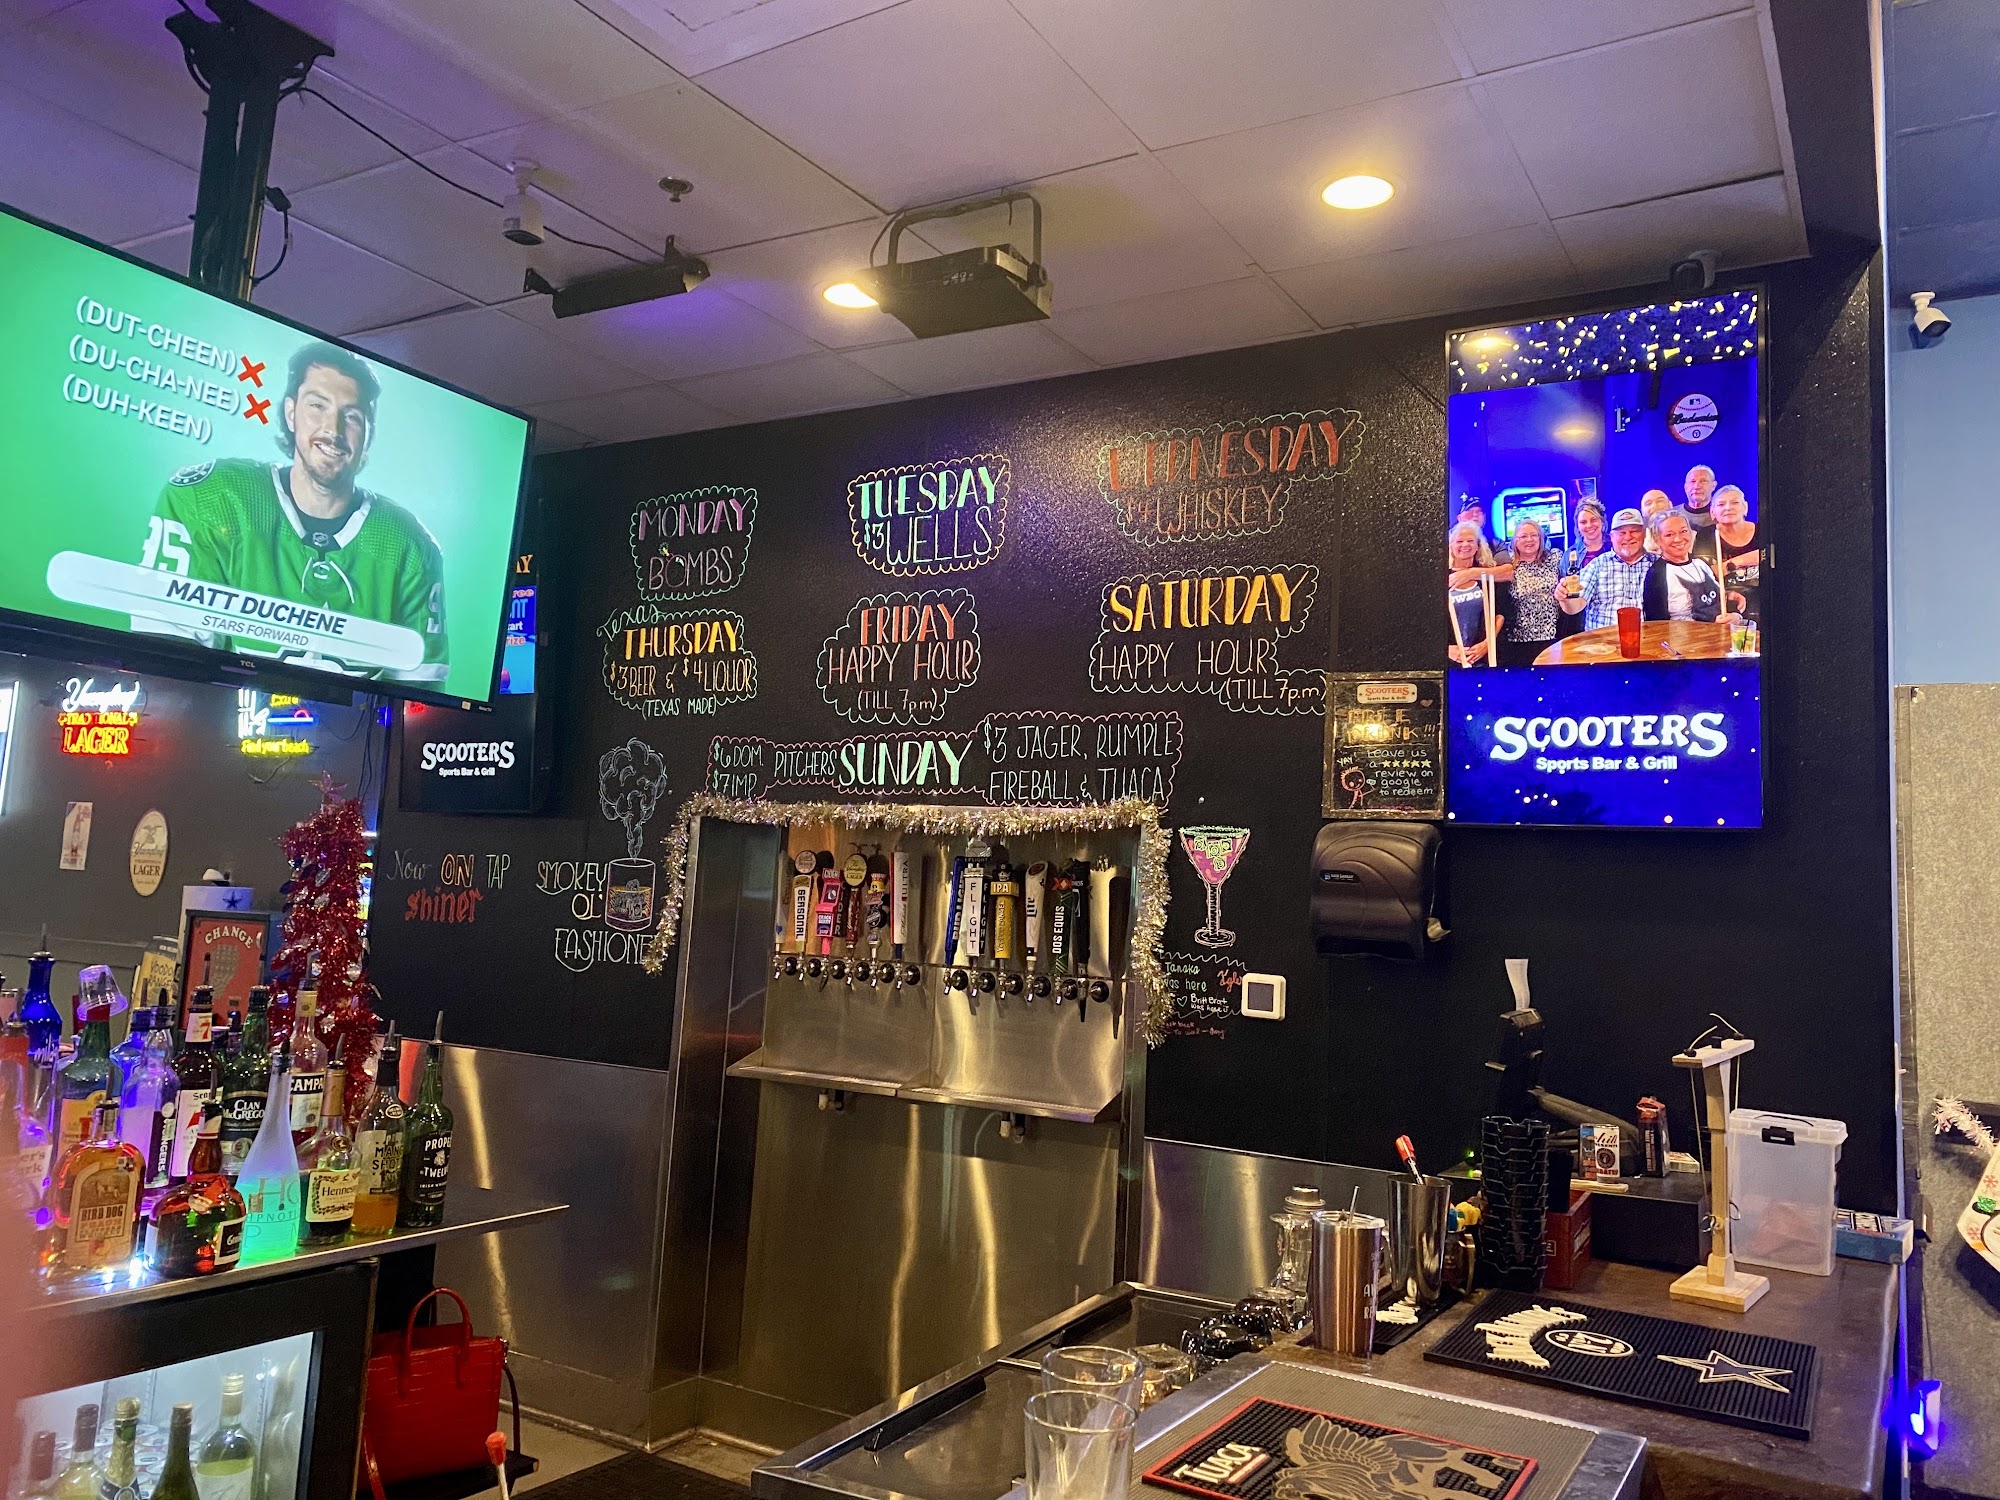 Scooters Sports Bar & Grill